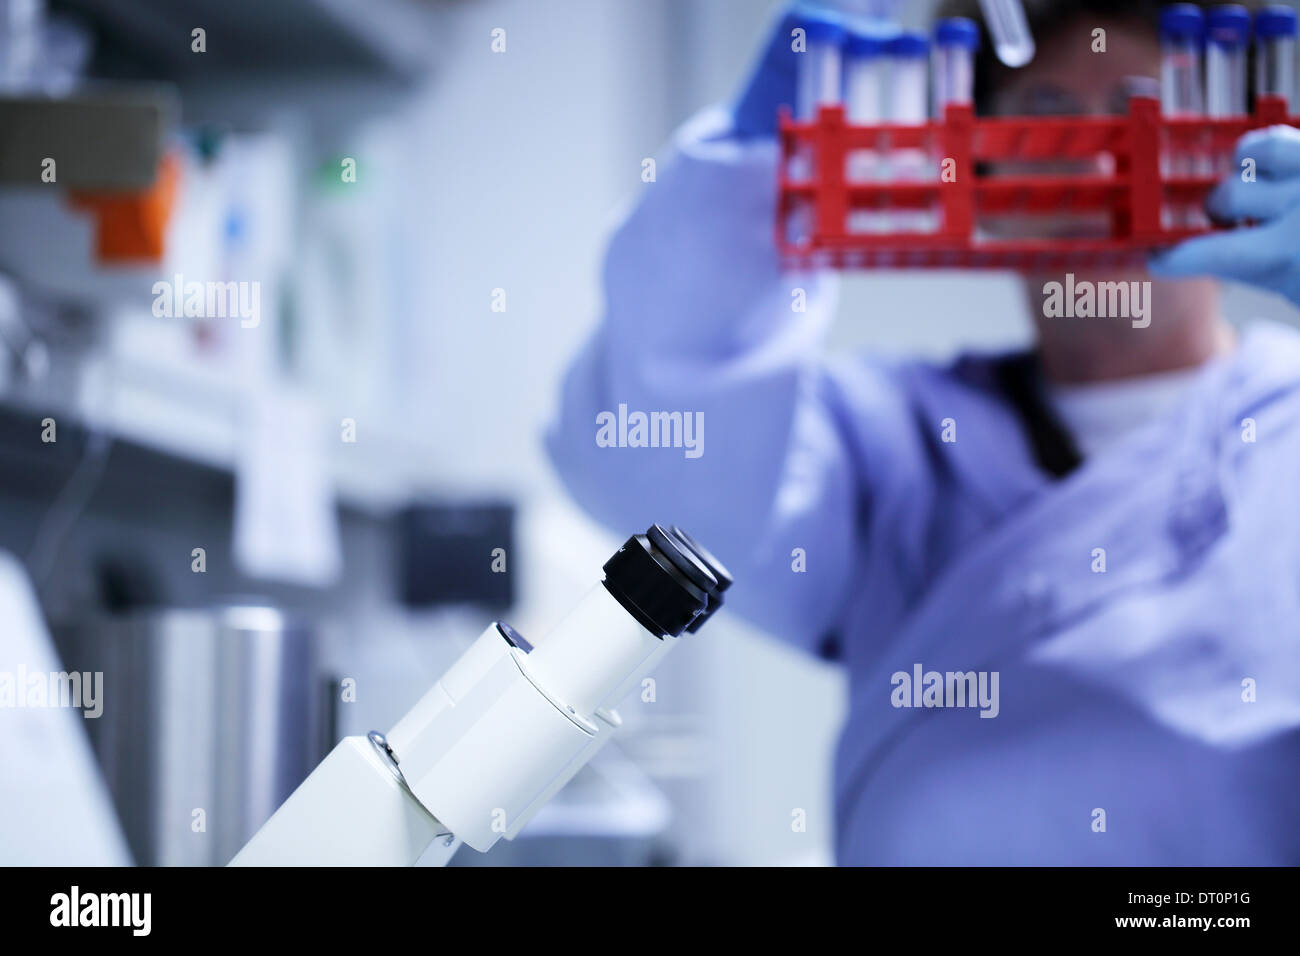 ocular of a microscope and a scientist with blue lab coat Caucasian woman working Stock Photo